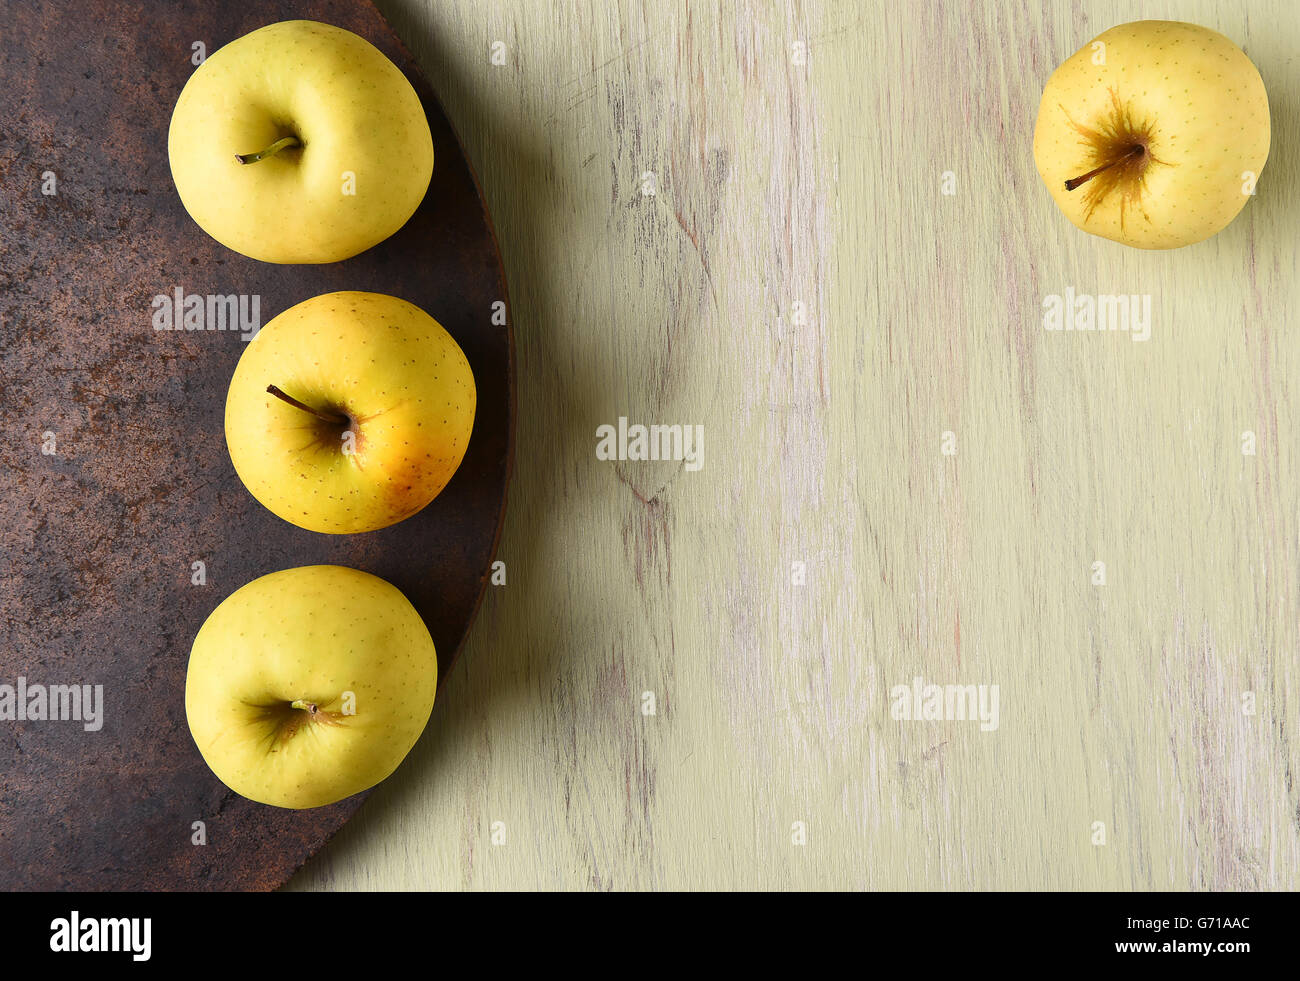 Golden Delicious apples still life with copy space. Stock Photo